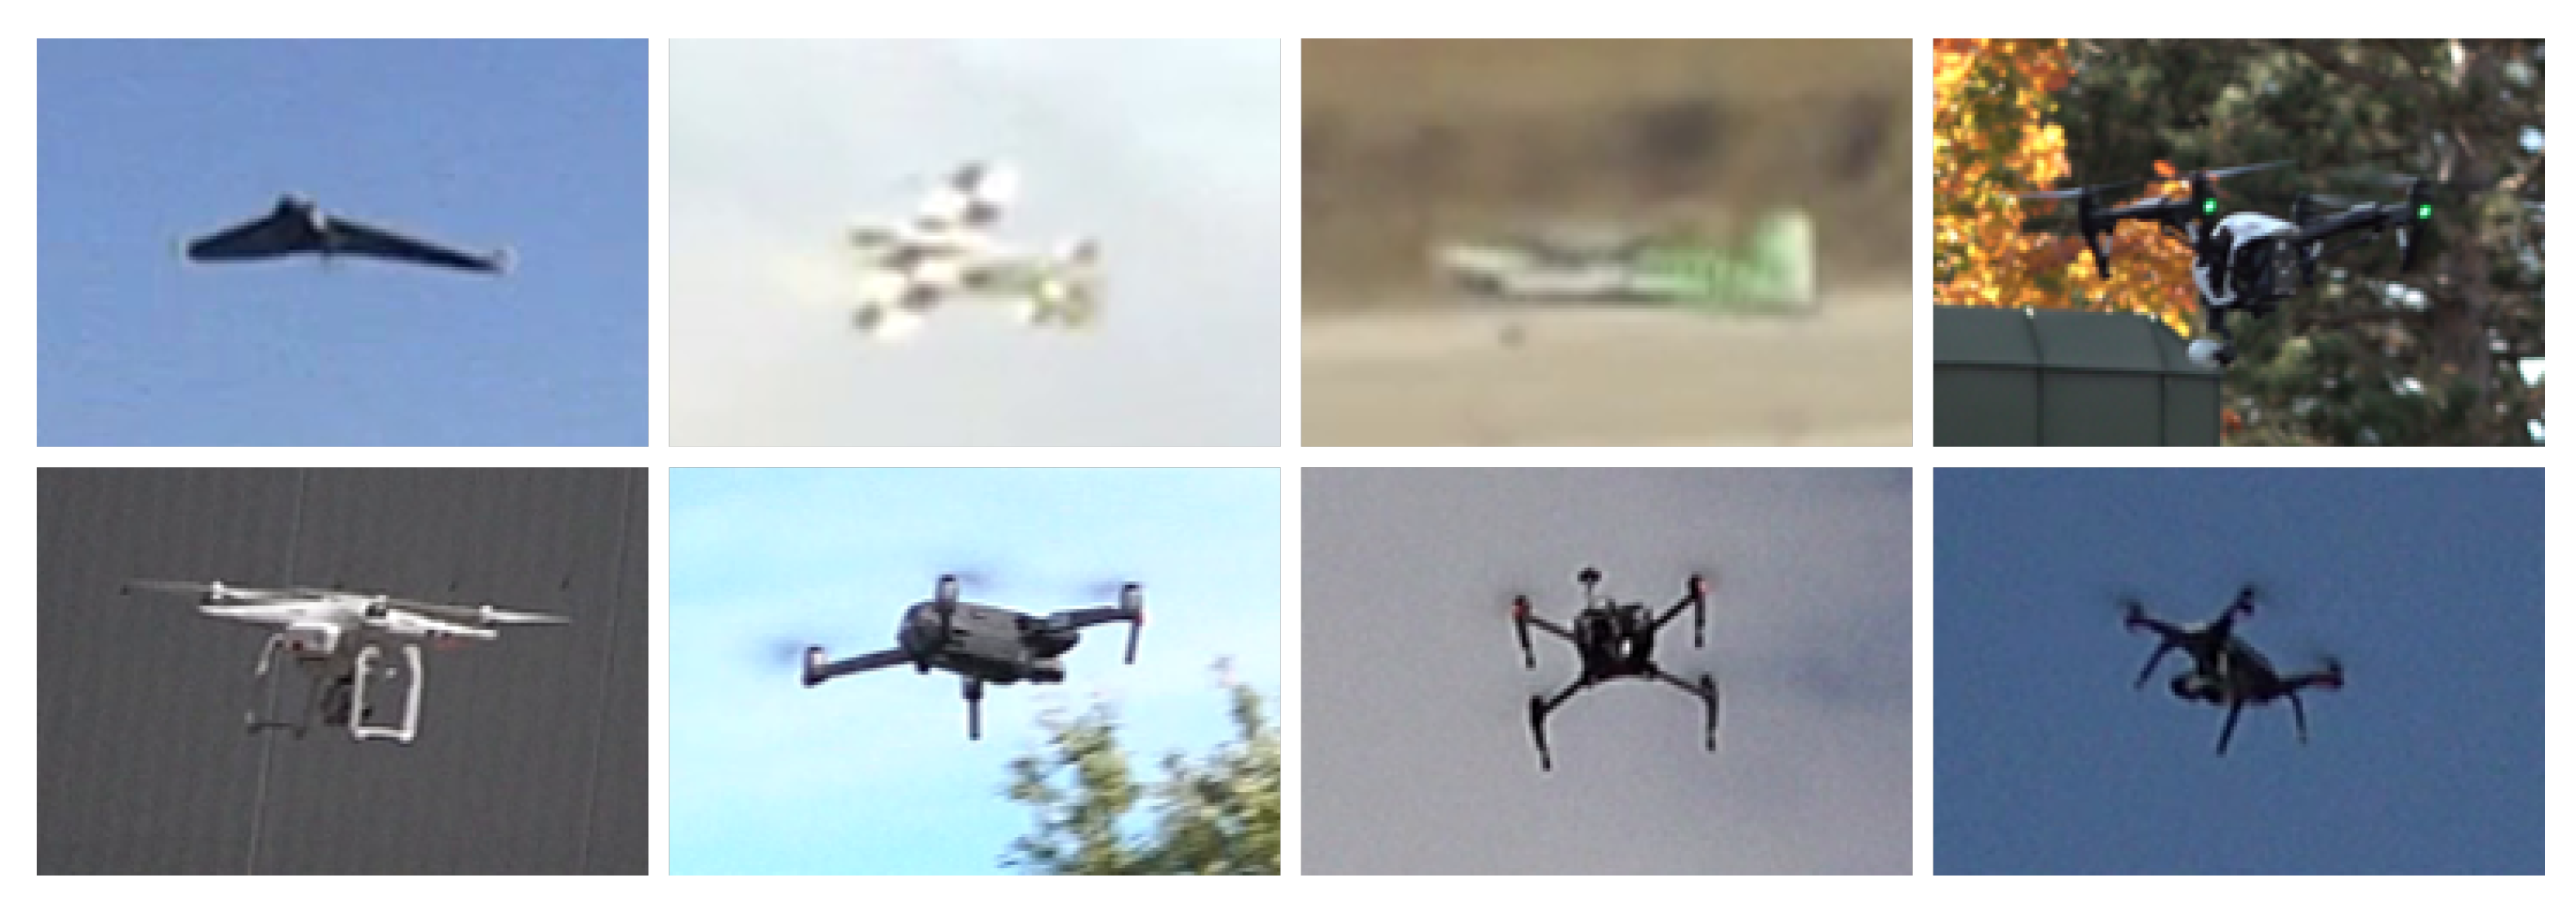 Sensors | Free Full-Text | Drone vs. Bird Detection: Deep Learning  Algorithms and Results from a Grand Challenge | HTML